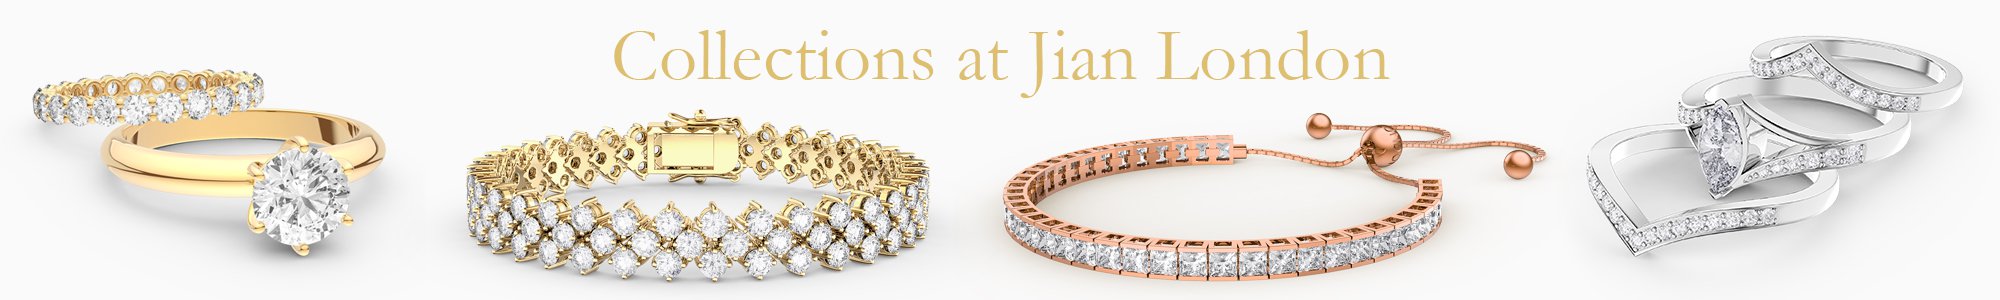 Jewellery Collections for everyone - from precious gemstones to Diamonds. From Silver to 18ct Gold.